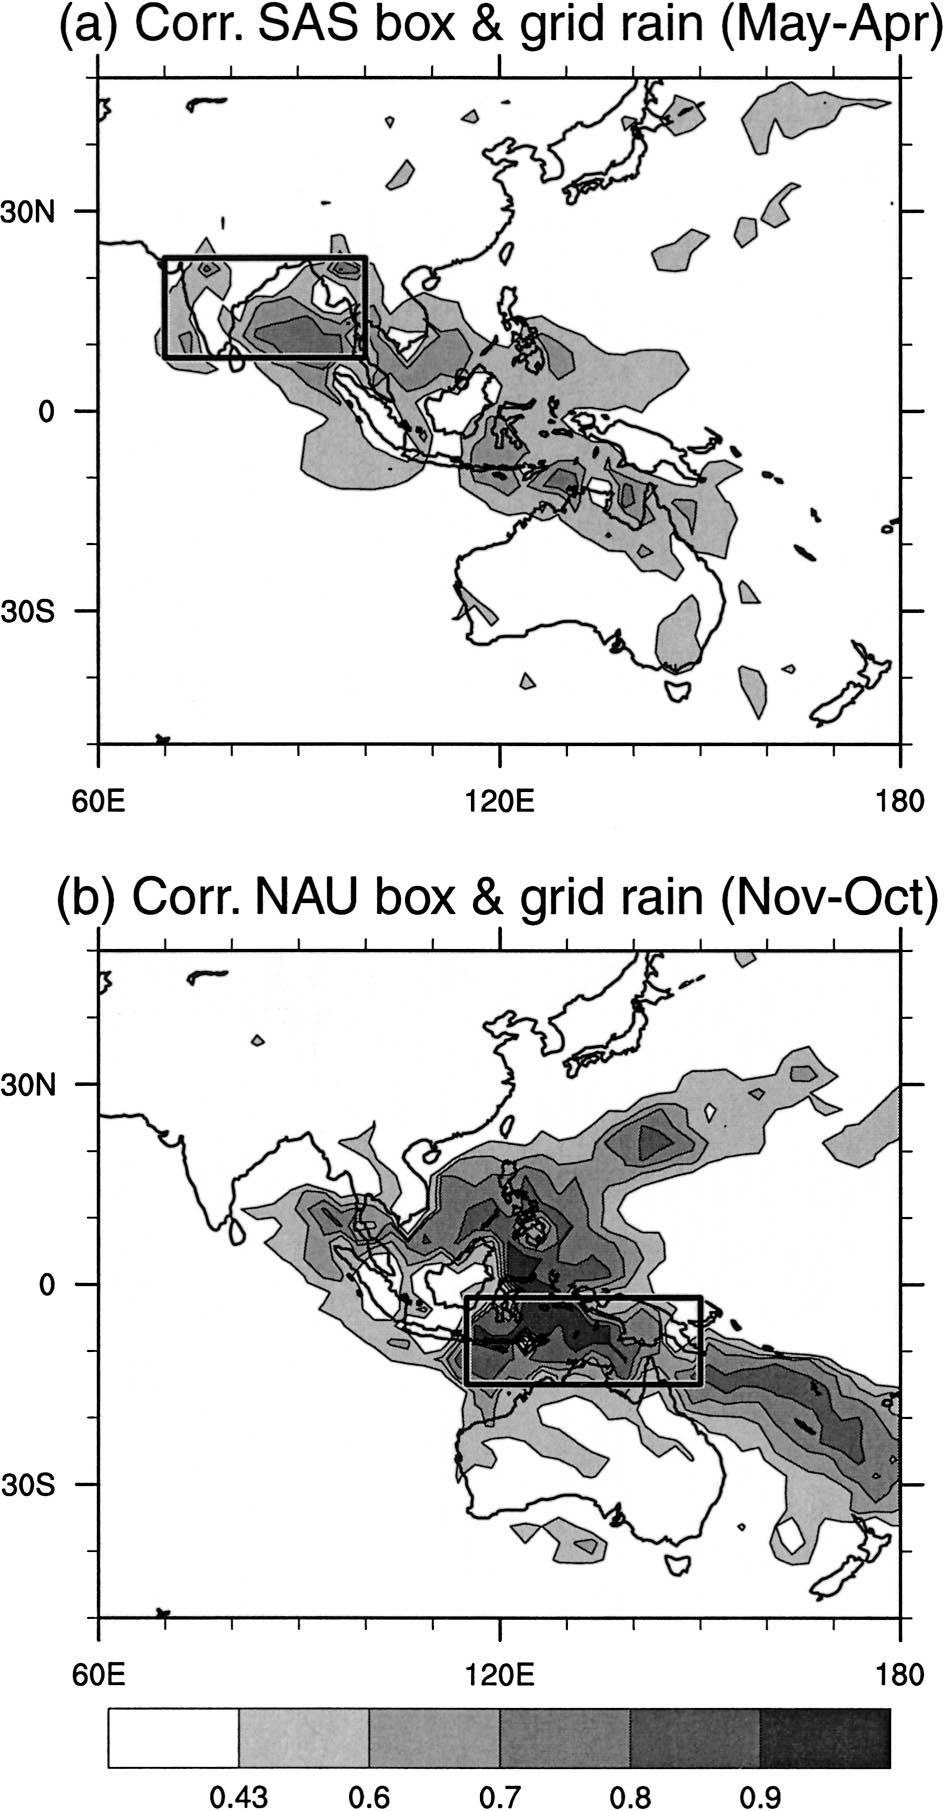 2418 JOURNAL OF CLIMATE VOLUME 17 rainfall in the Asian Australian monsoon system is correlated with the ENSO in a symmetric way, this fact alone does not explain the one-way (northwest to southeast)